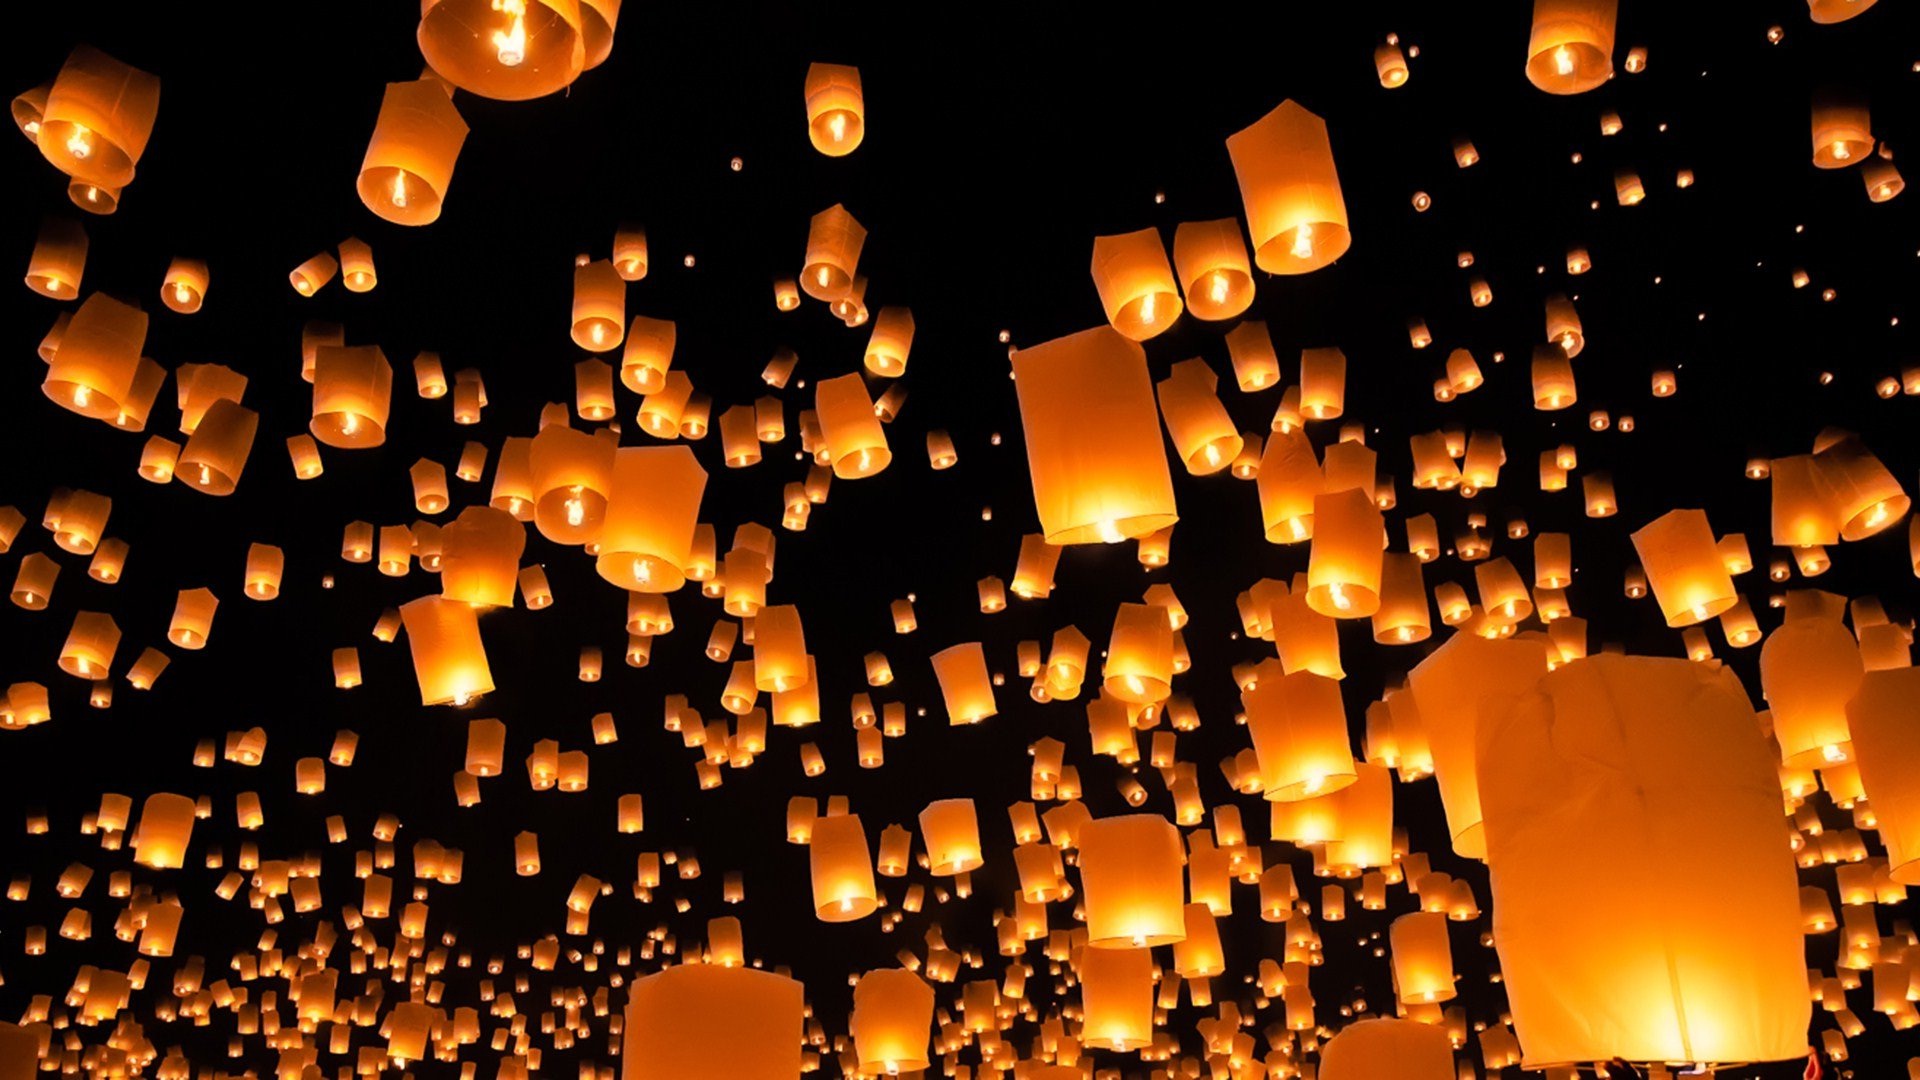 Candle Lights Flying Amazing Wallpapers 101 Awesome - Photography Desktop  Background Hd - 1920x1080 Wallpaper 